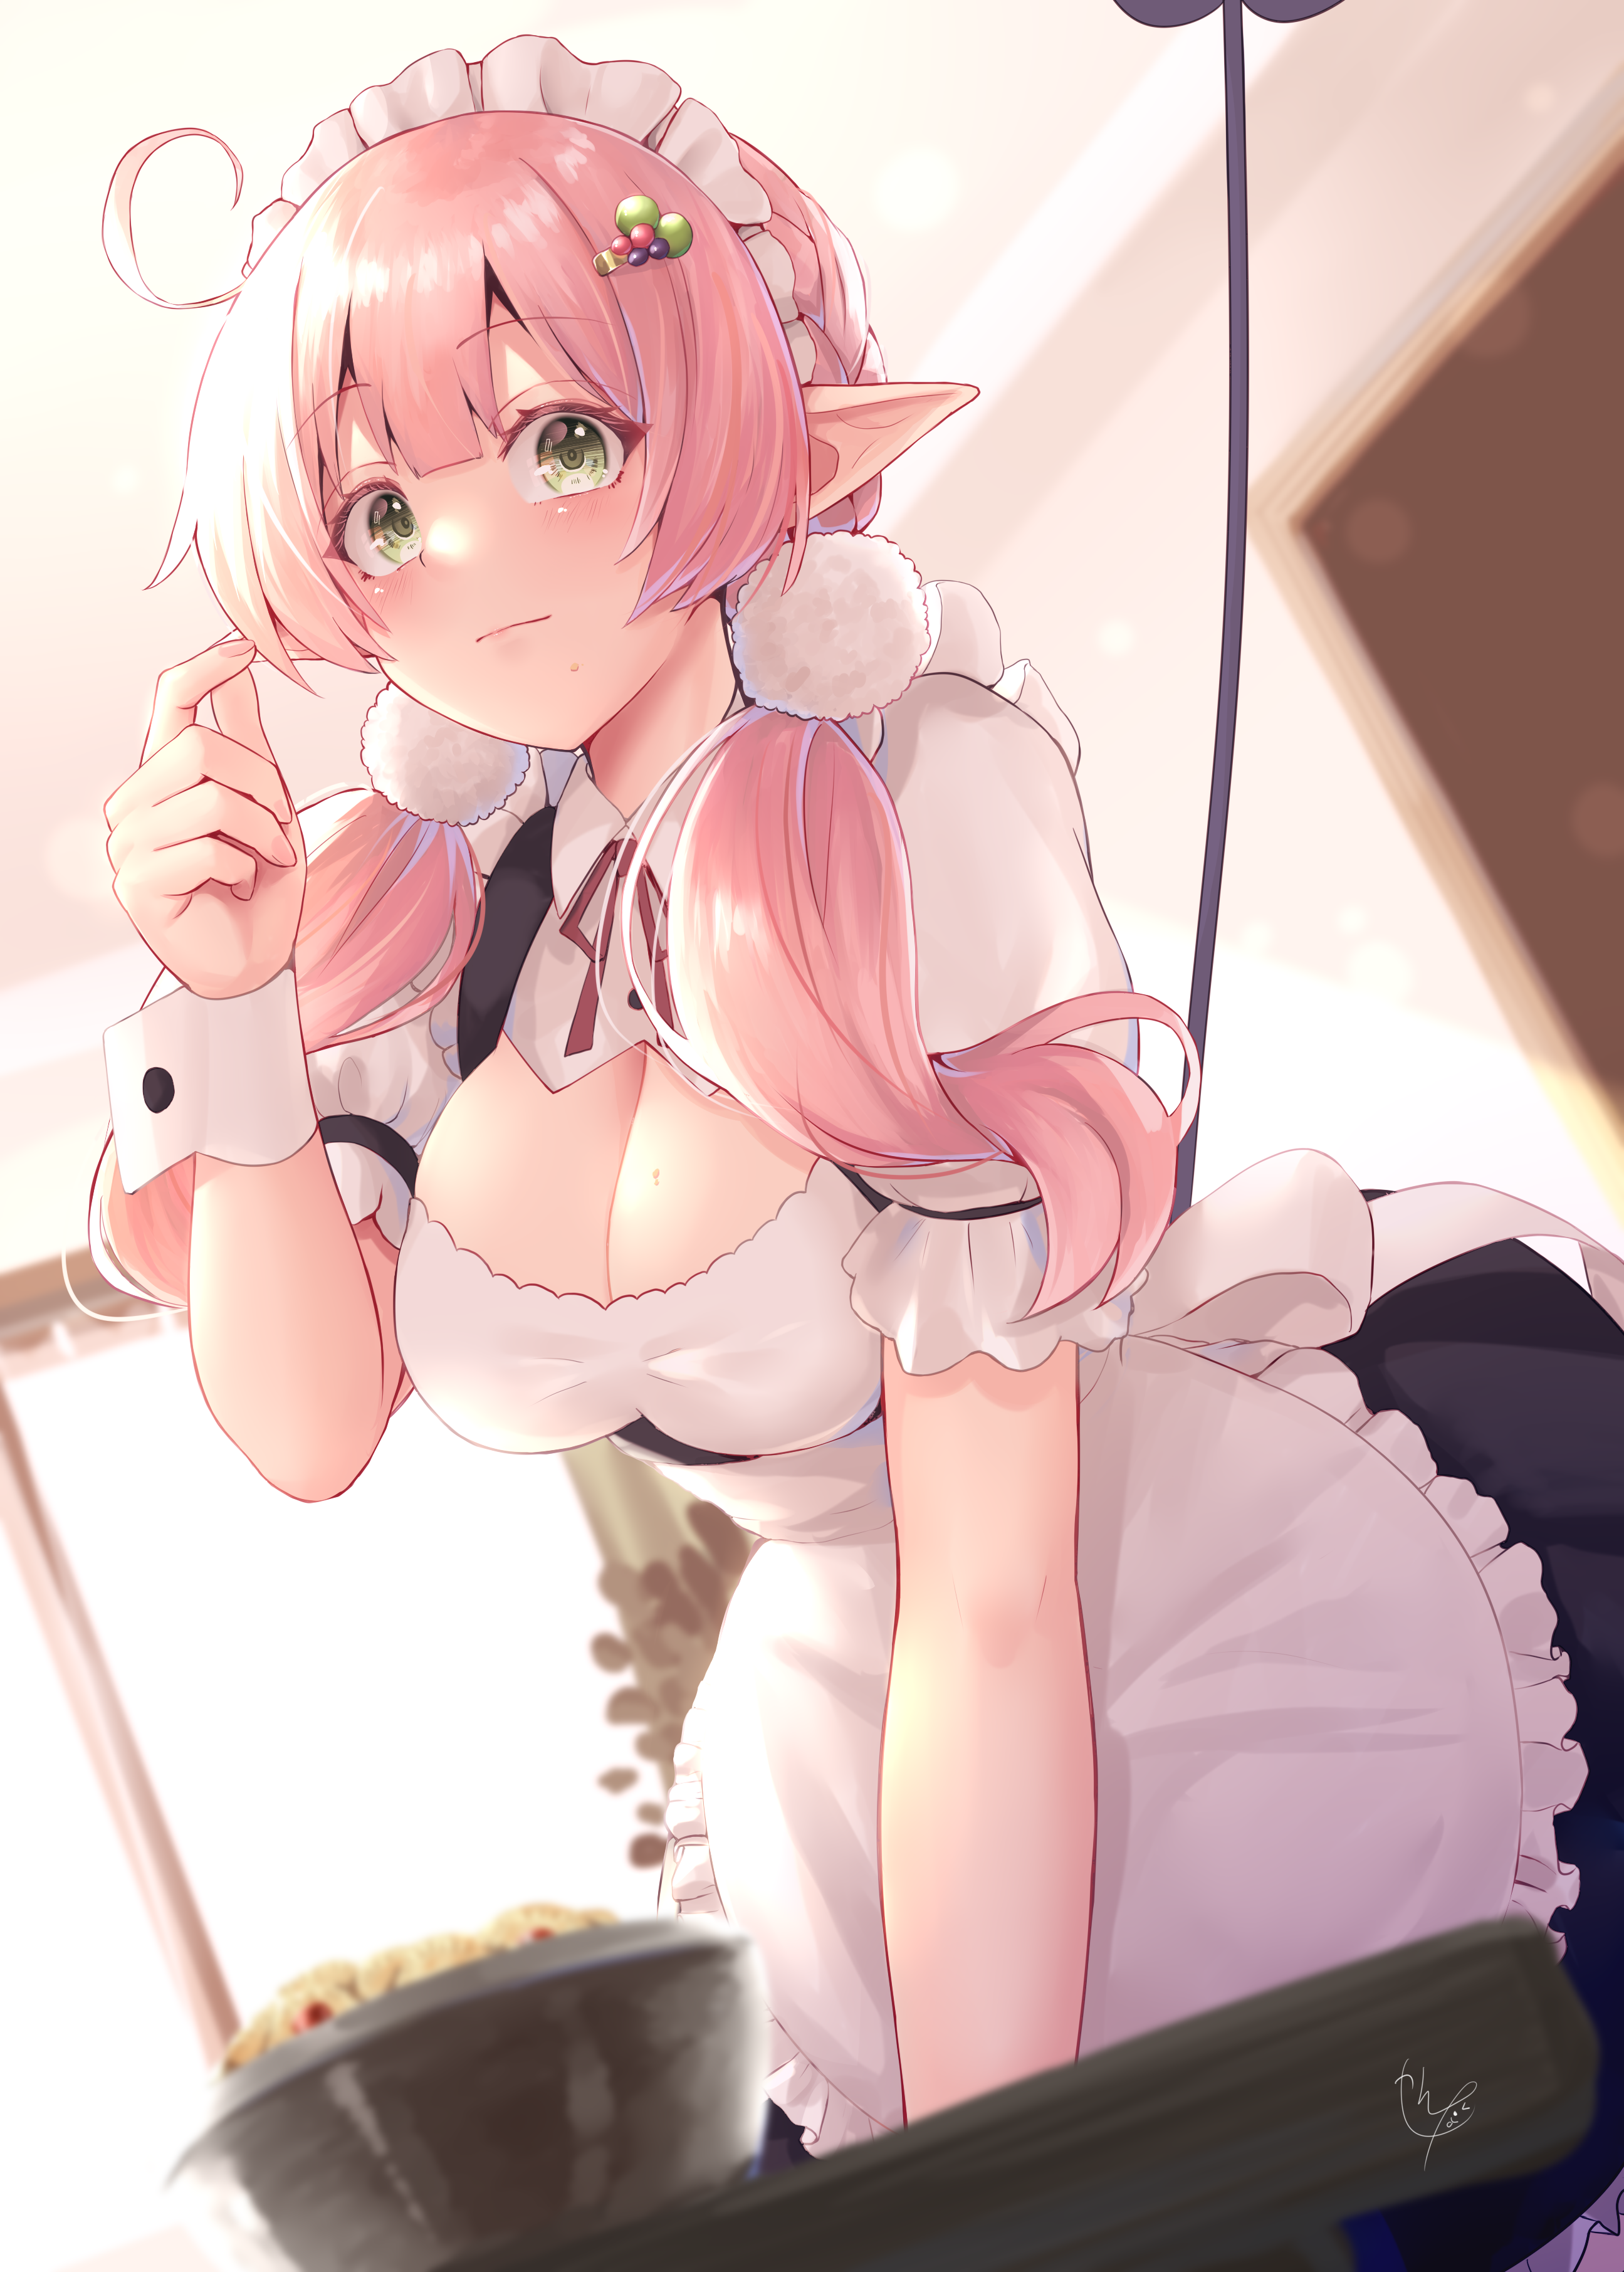 Anime 2591x3624 anime anime girls original characters pink hair pointy ears maid maid outfit big boobs cleavage Narushima Kanna portrait display